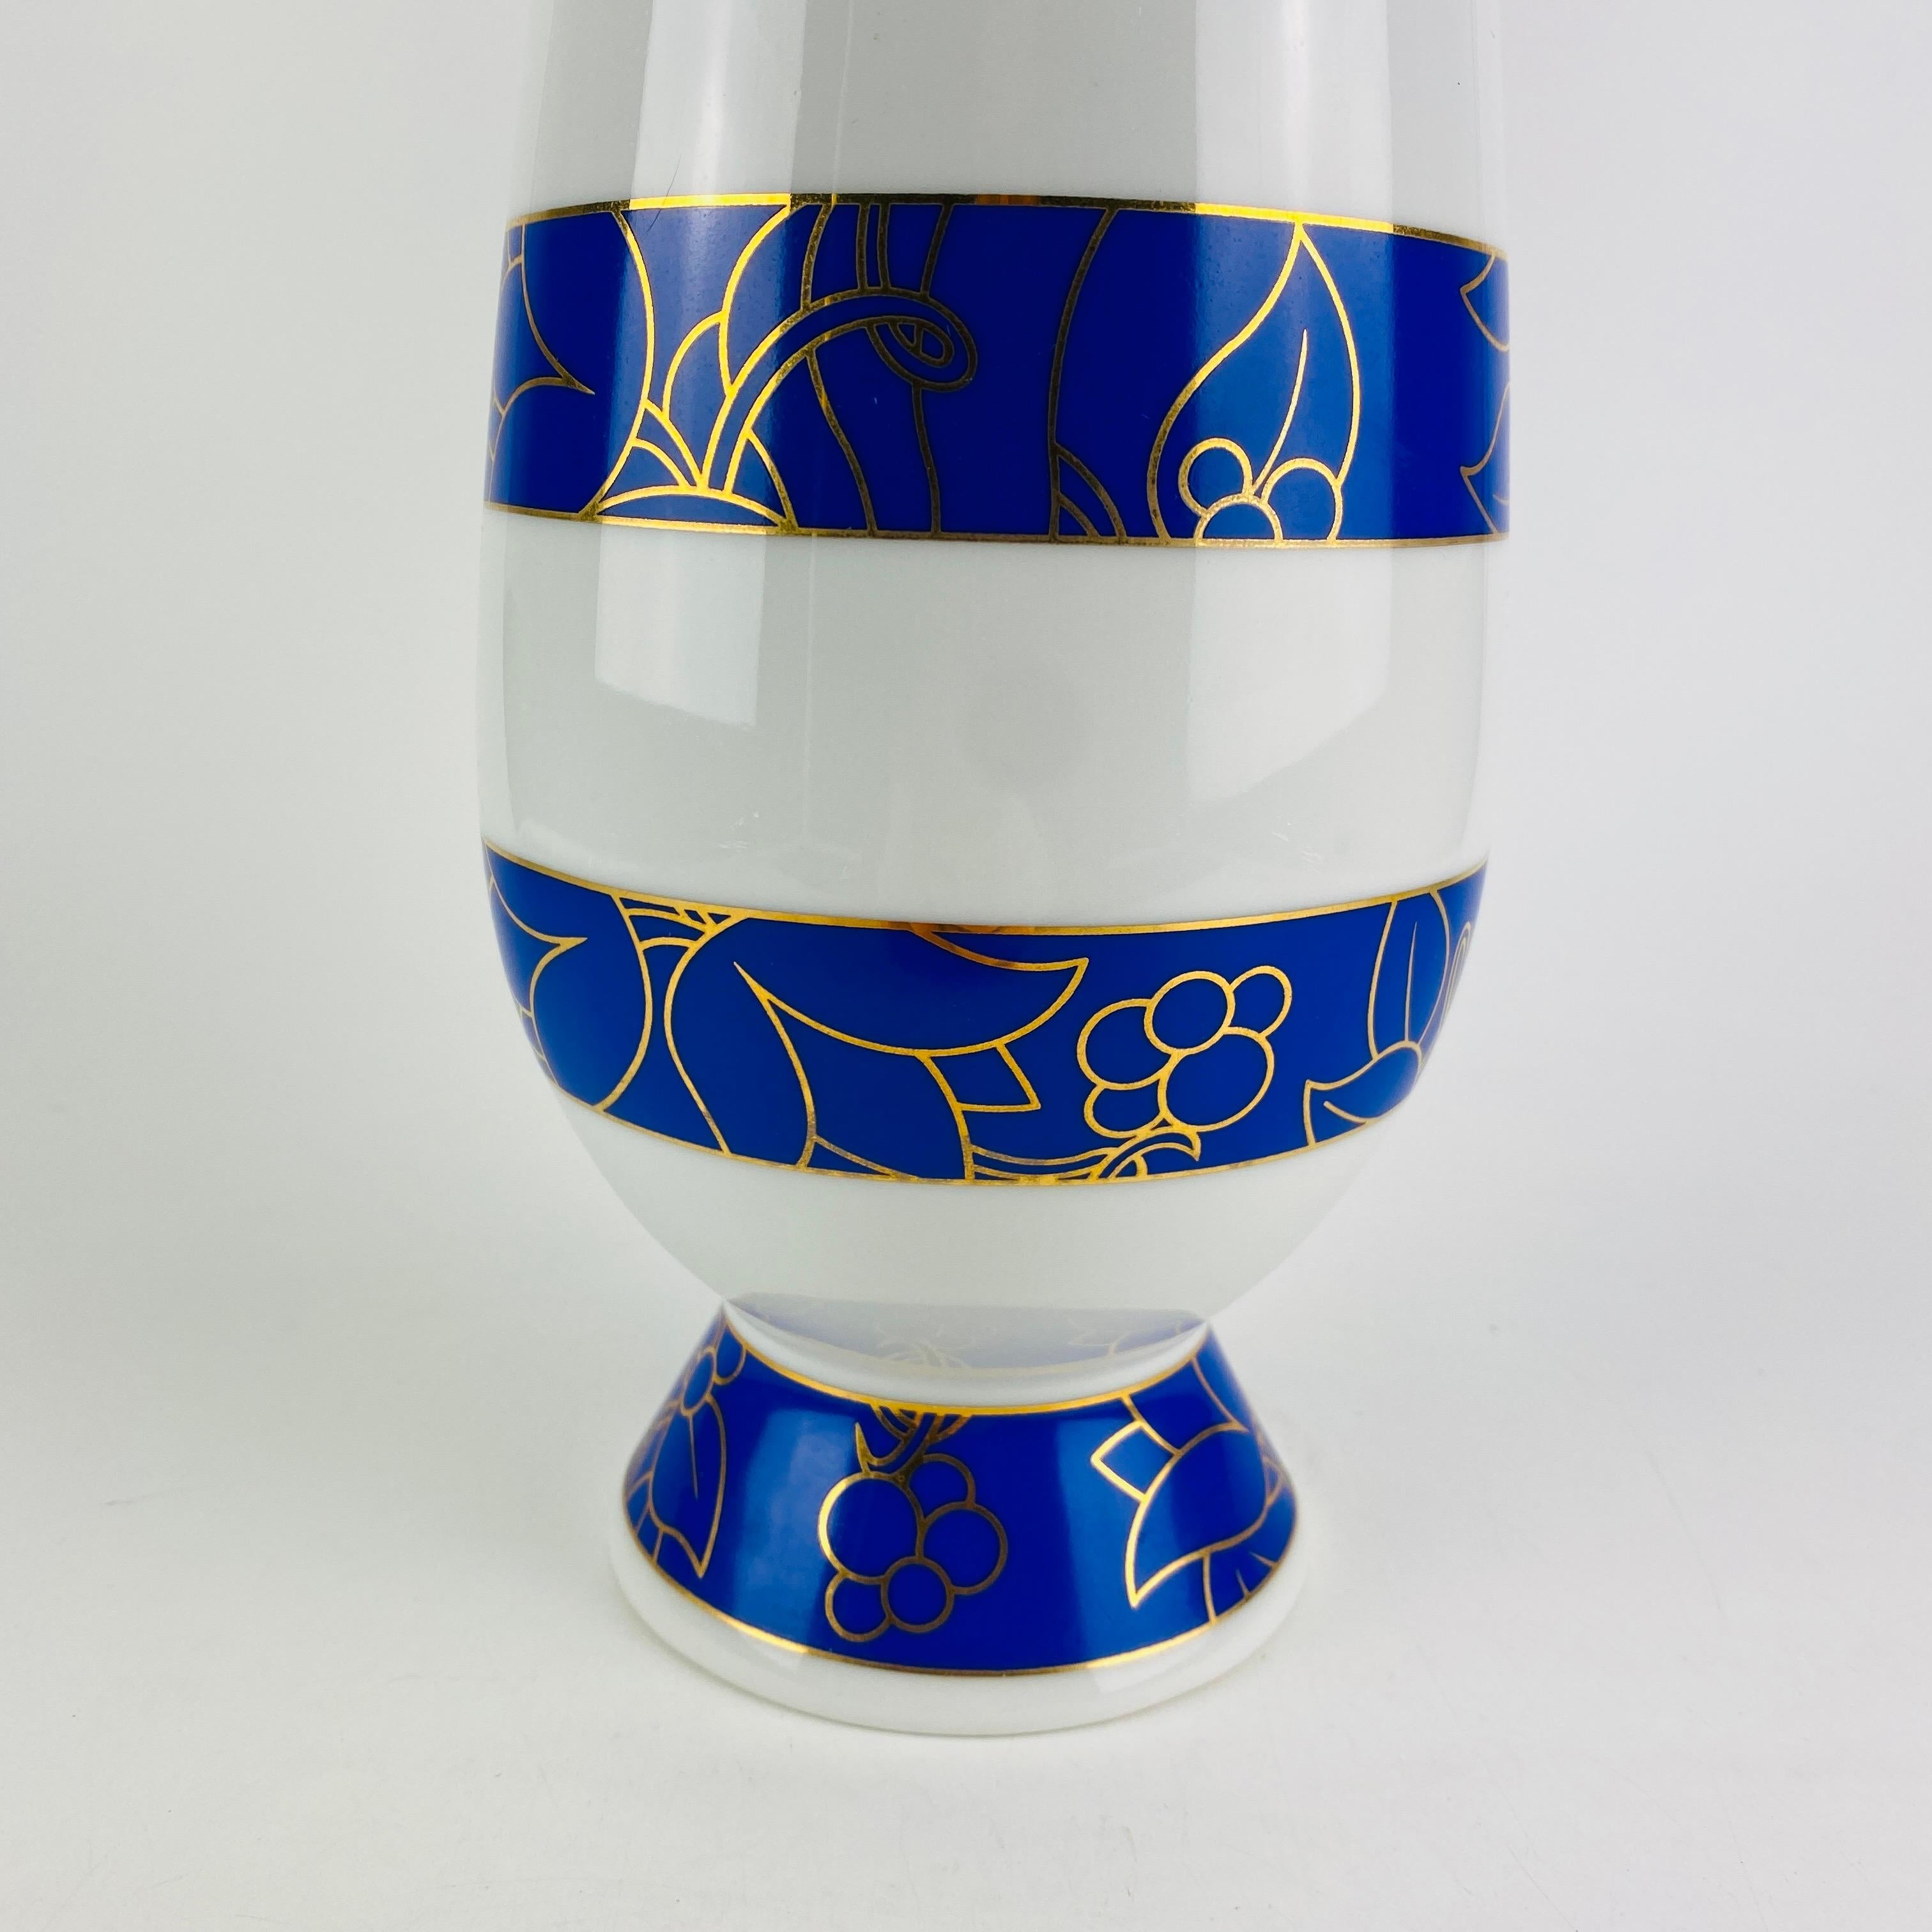 Mid-Century Modern Alessi Tendentse Vase by Michael Graves for Alessandro Mendini 100% Make-up N32